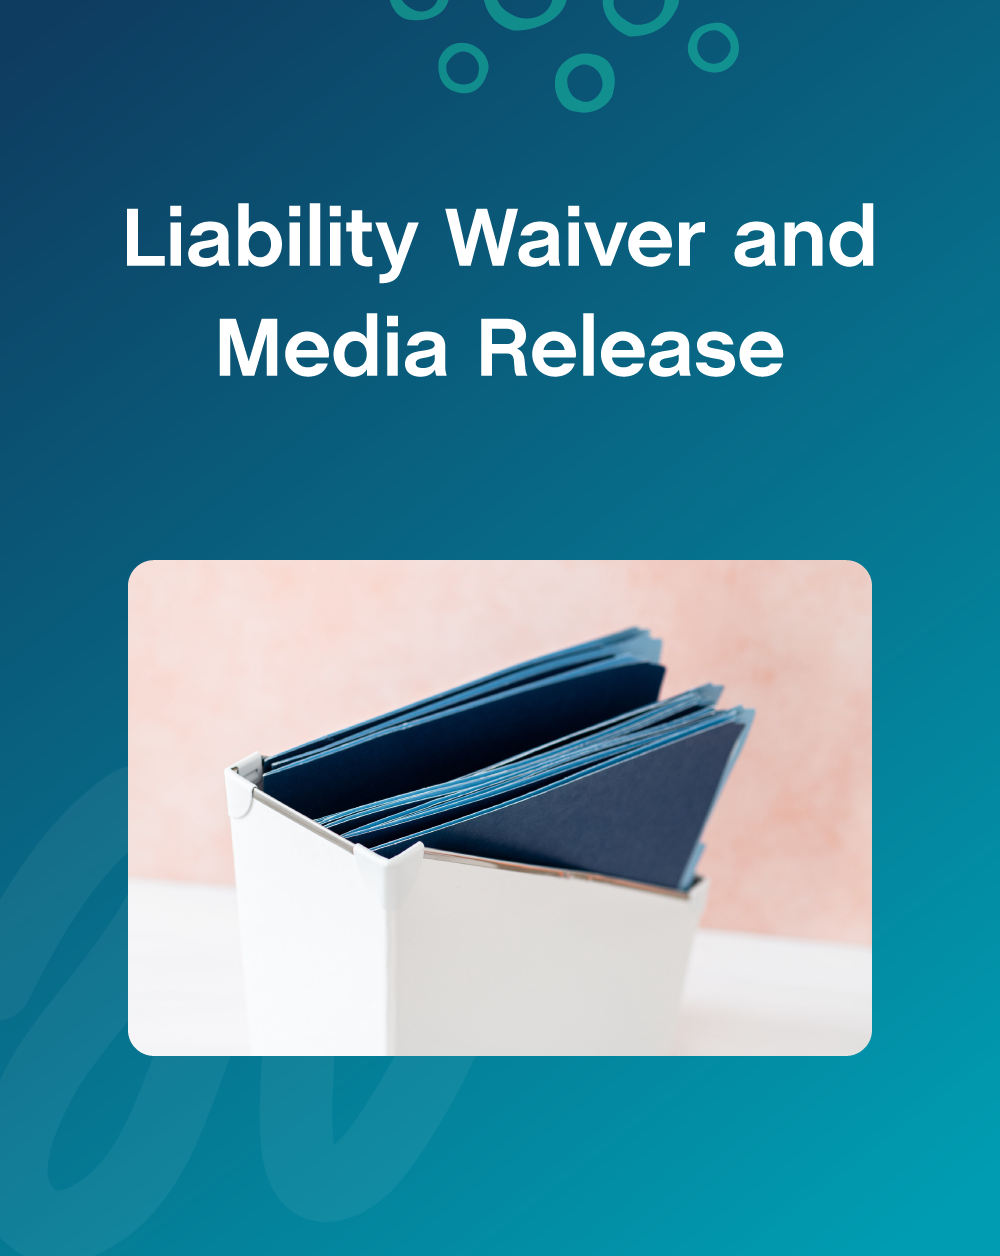 Liability Waiver and Media Release for In-Person Events - The Contract Shop®